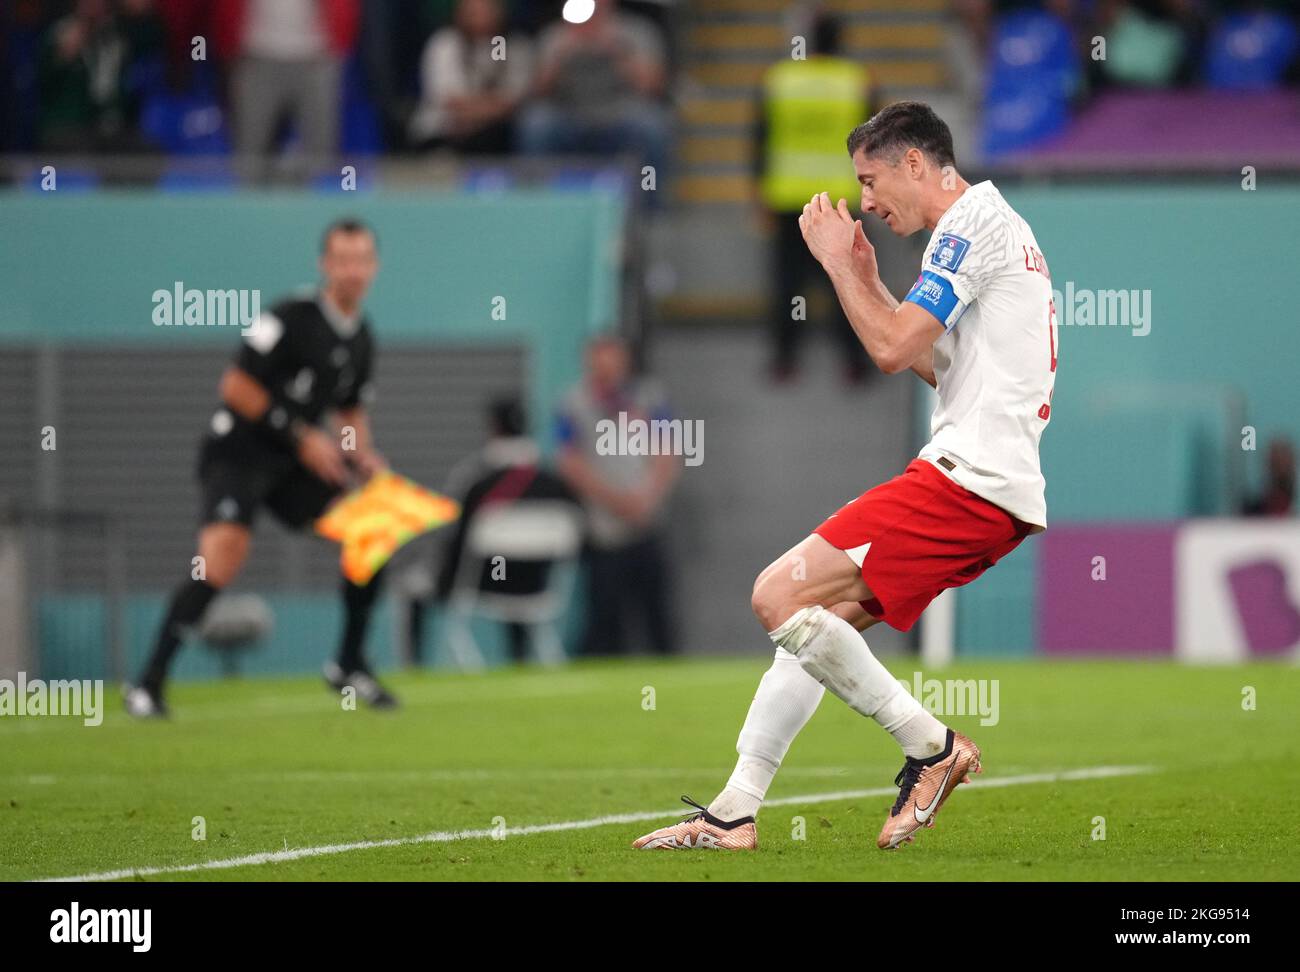 Poland's Robert Lewandowski reacts after missing a penalty during the FIFA World Cup Group C match at Stadium 974, Rass Abou Aboud. Picture date: Tuesday November 22, 2022. Stock Photo